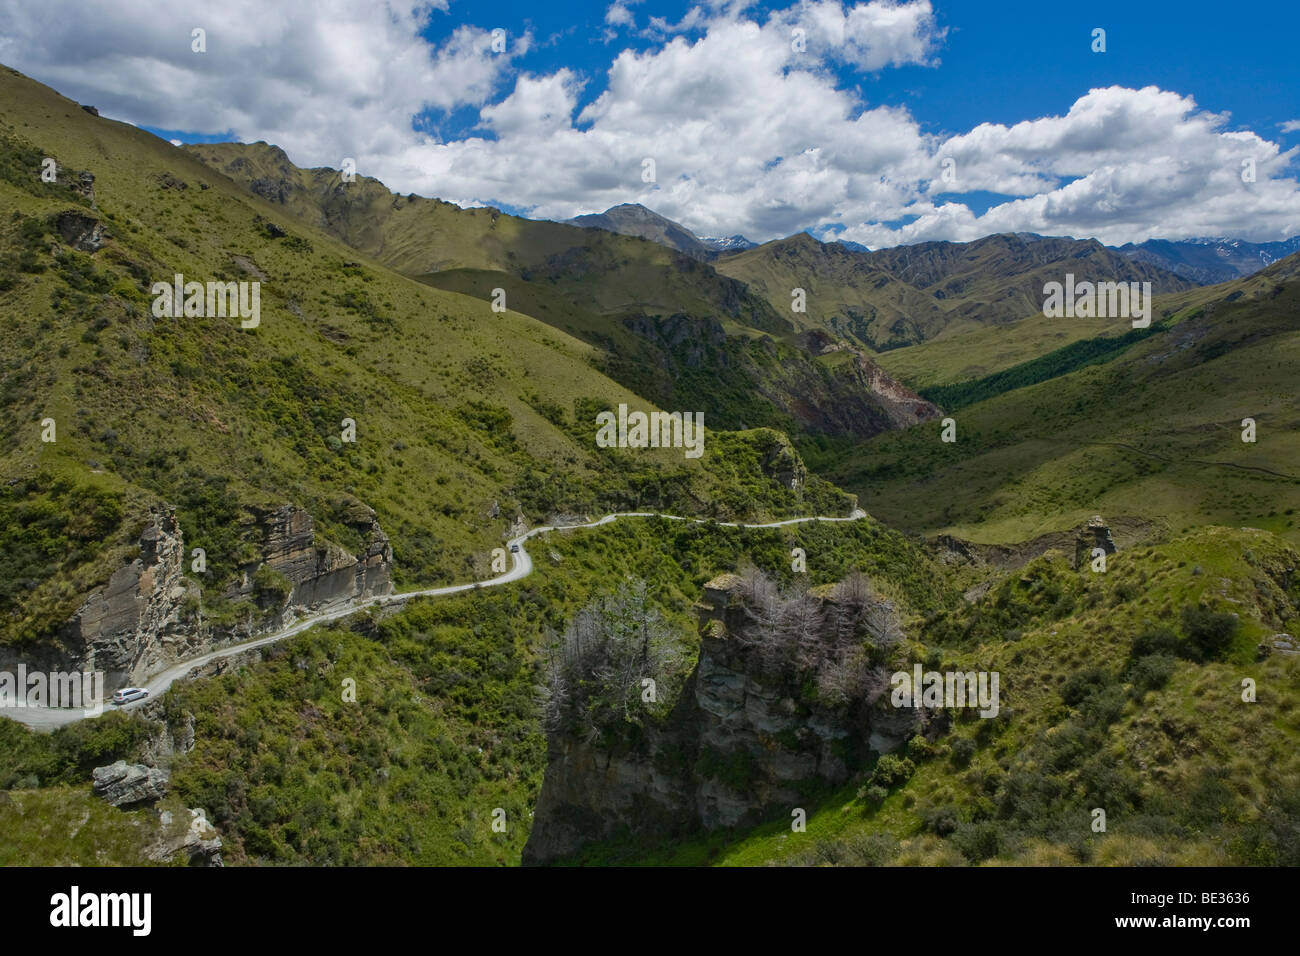 Winding dirt road in the verdant Skippers Canyon, Queenstown, South Island, New Zealand Stock Photo